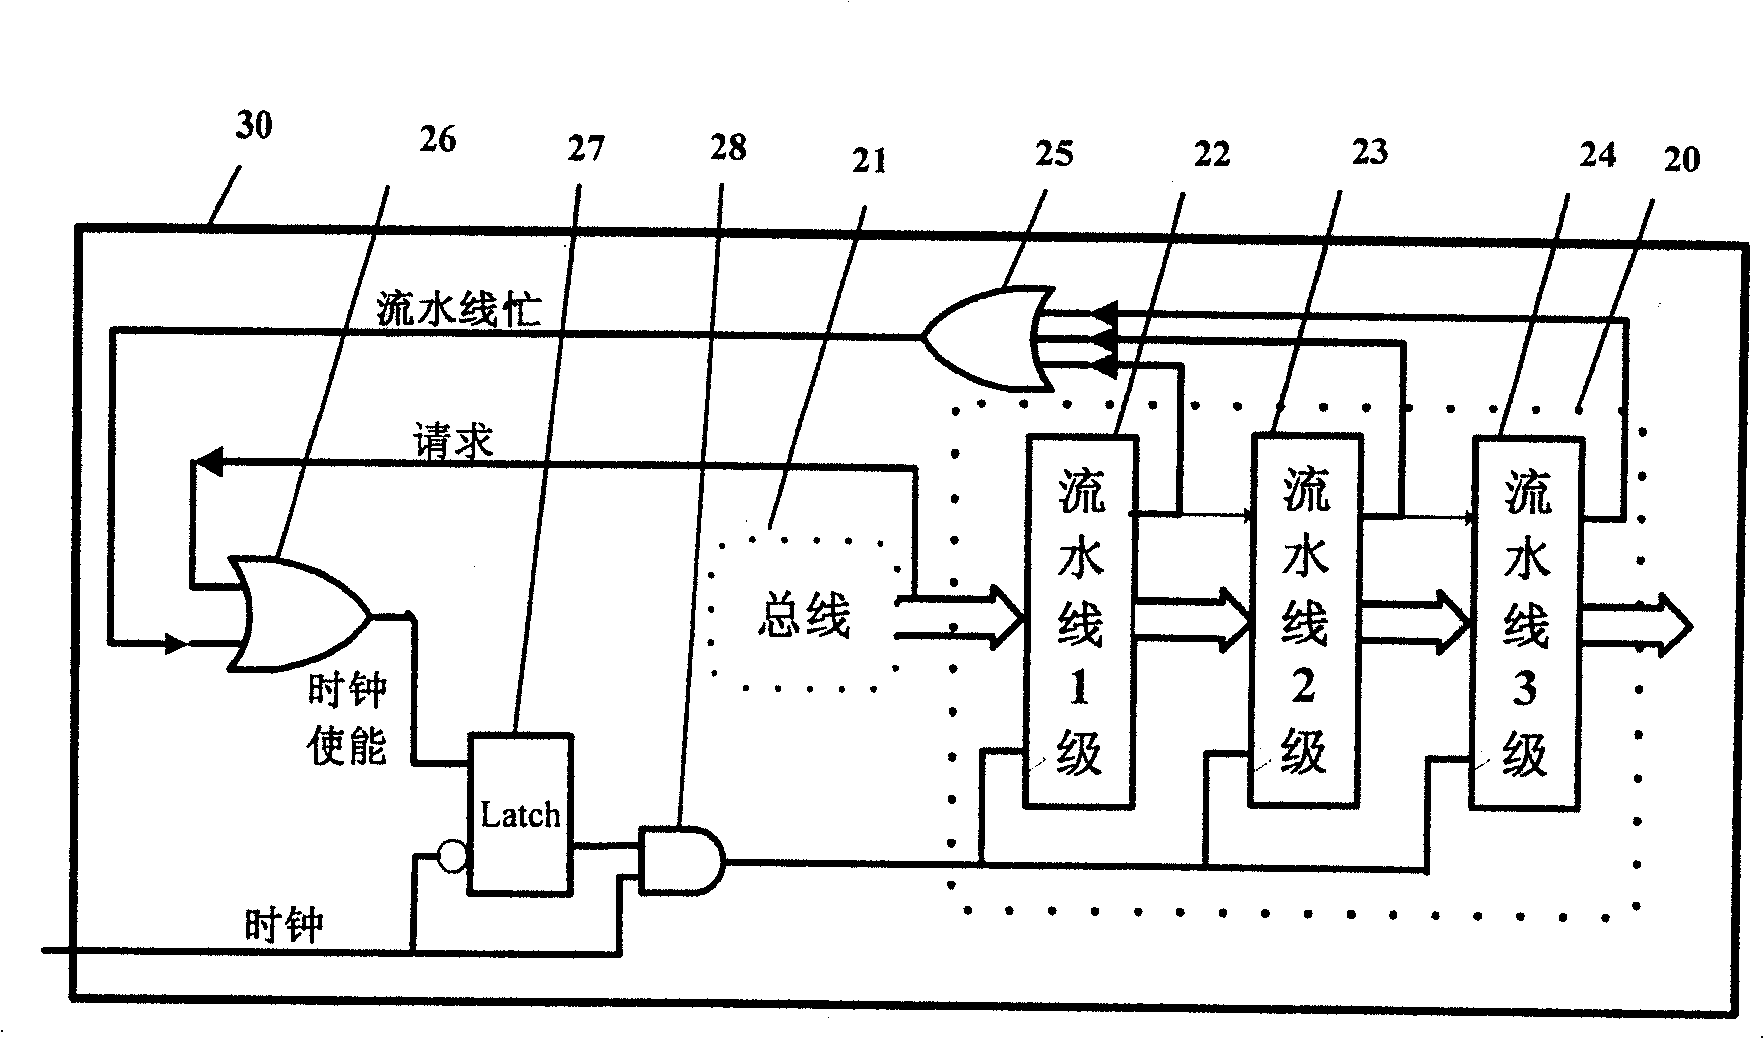 Power consumption reduction method for intellectual core and functional module for chip system